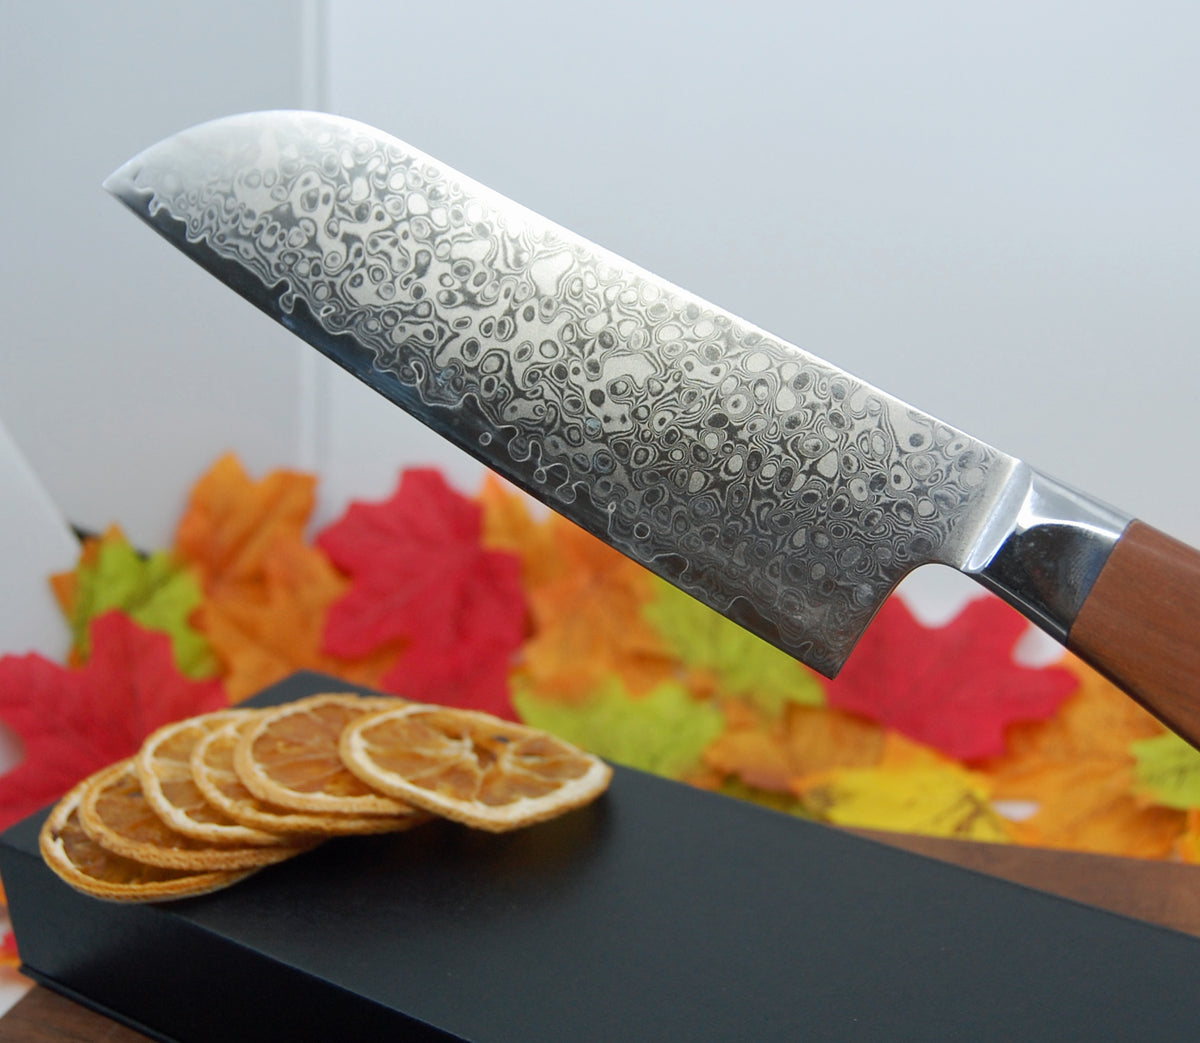 DAMASCUS STEEL CHEF'S KNIFE | Applewood Knife - Wedding Gift - Groomsmen Gift - Fathers Day - Minter and Richter Designs